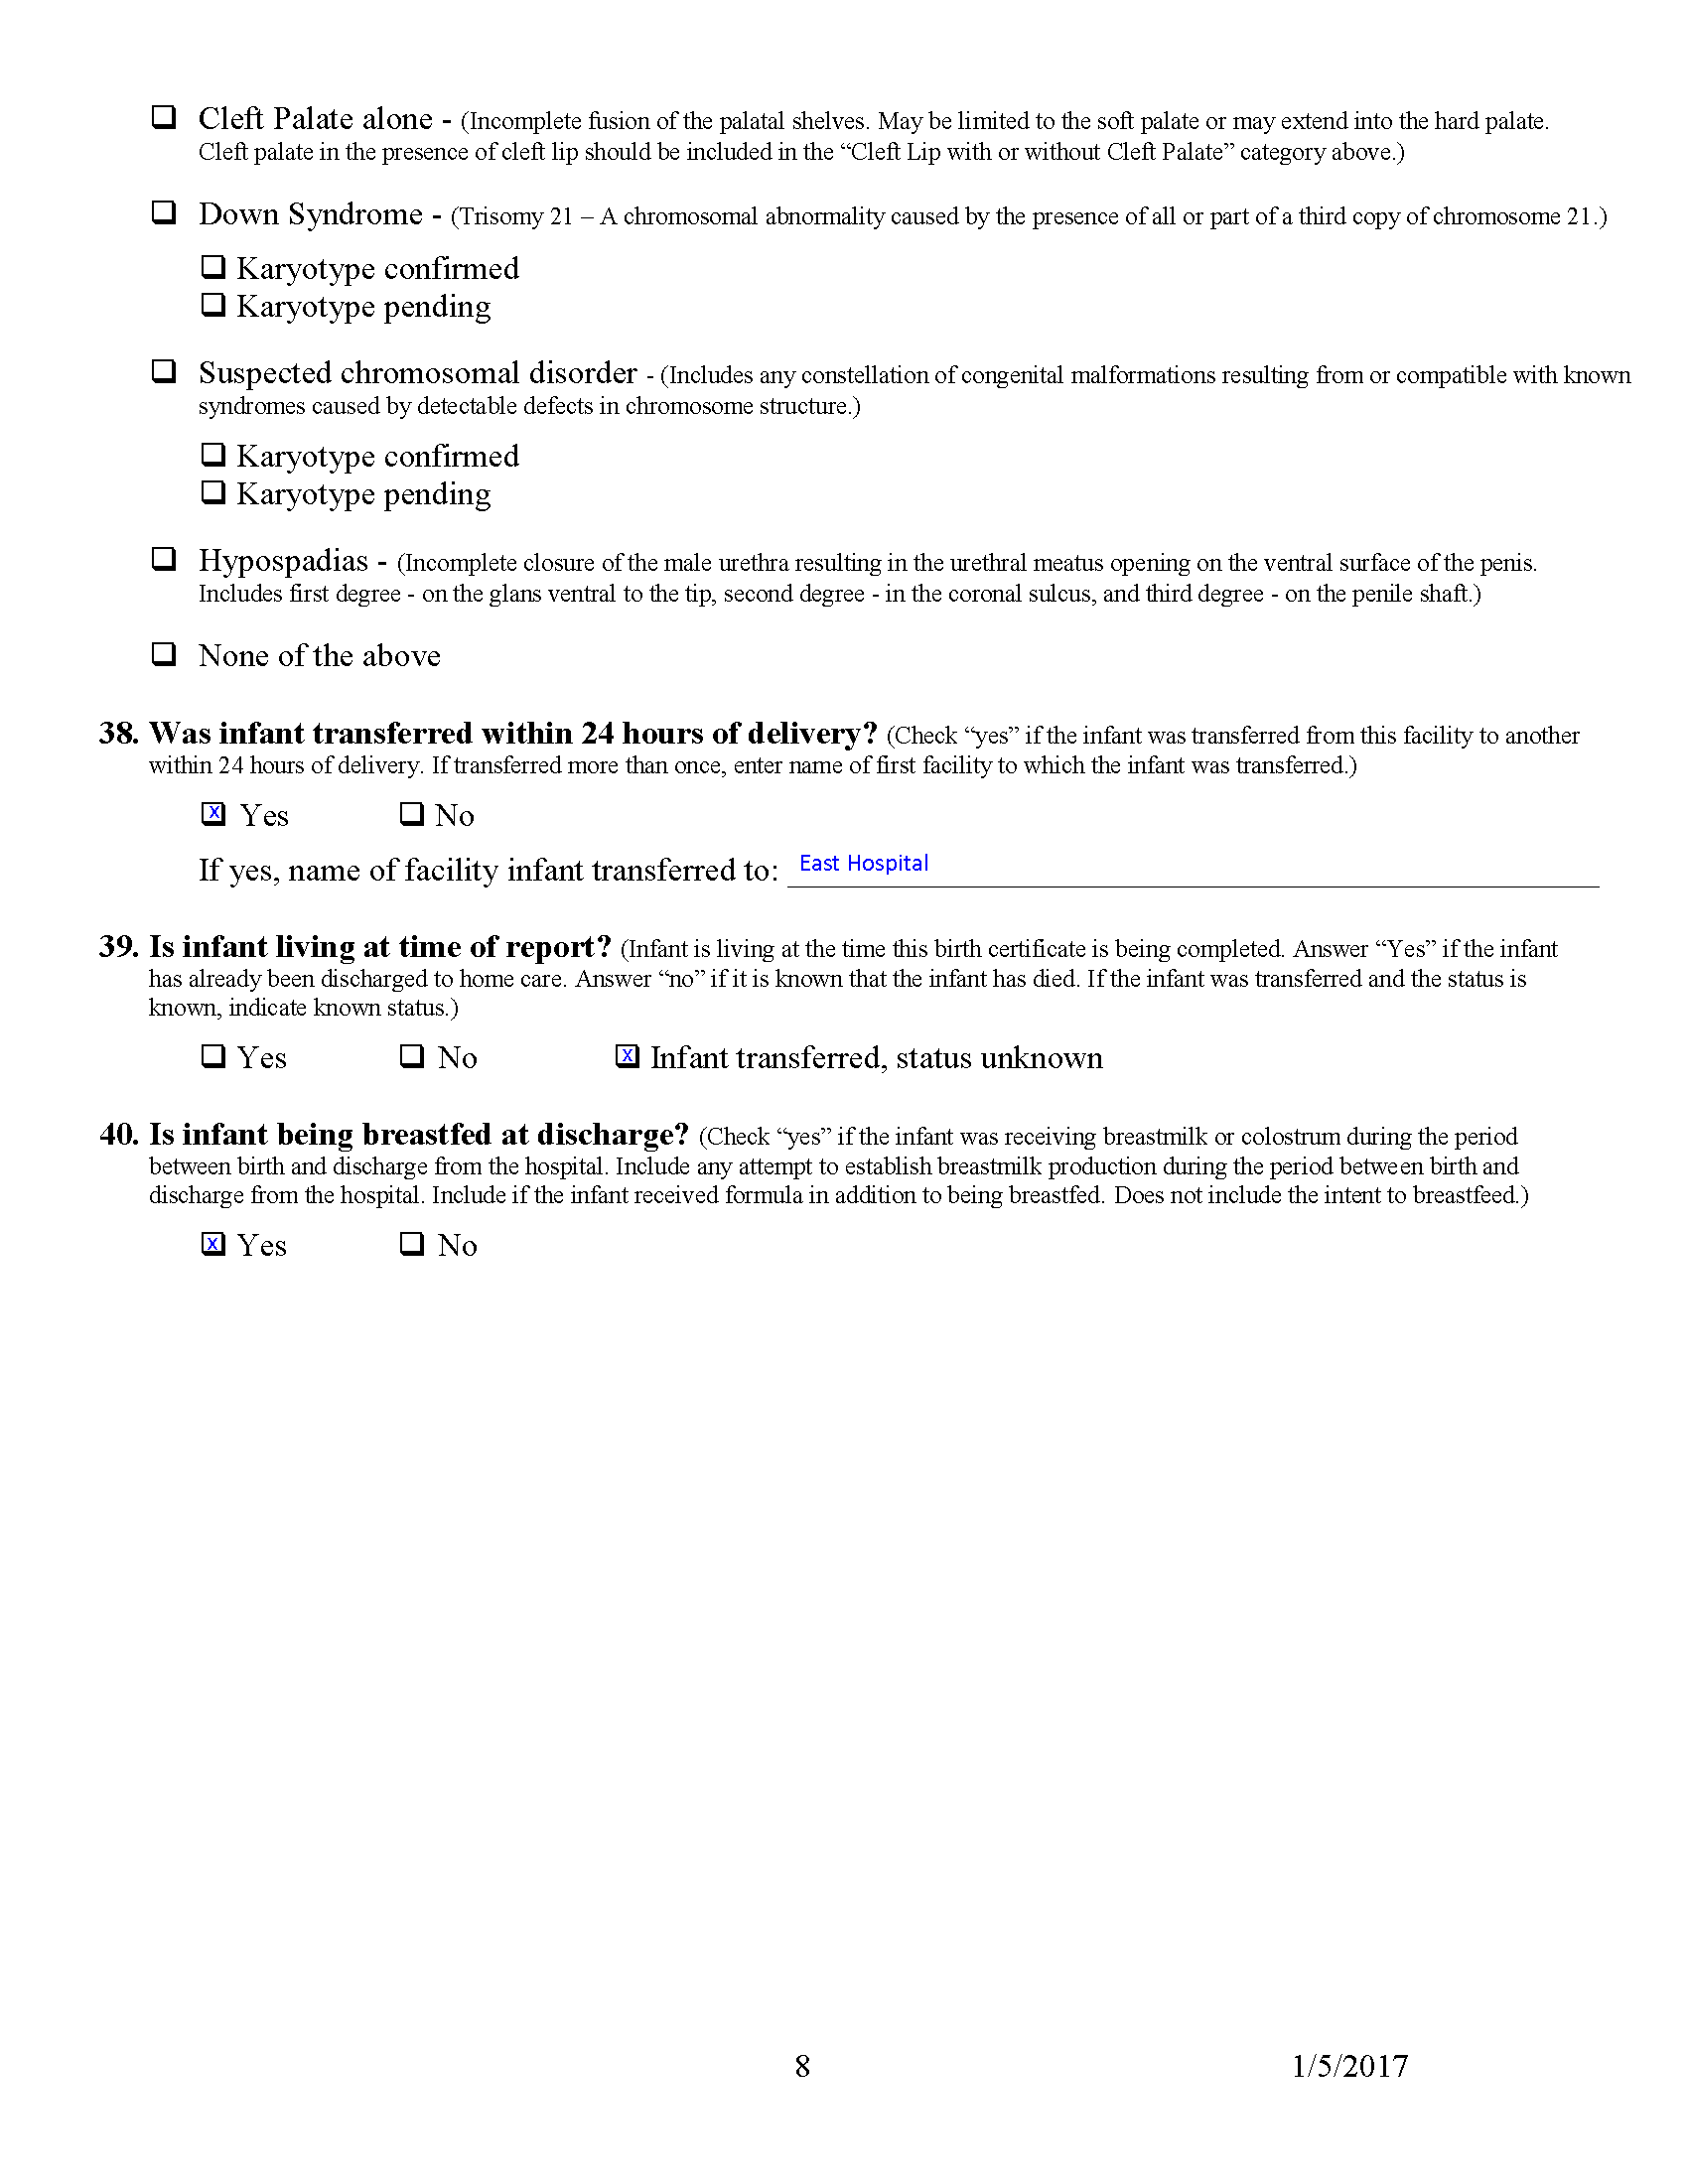 Example Facility Worksheet for Live Birth Certificate for Baby G Quinn - p8